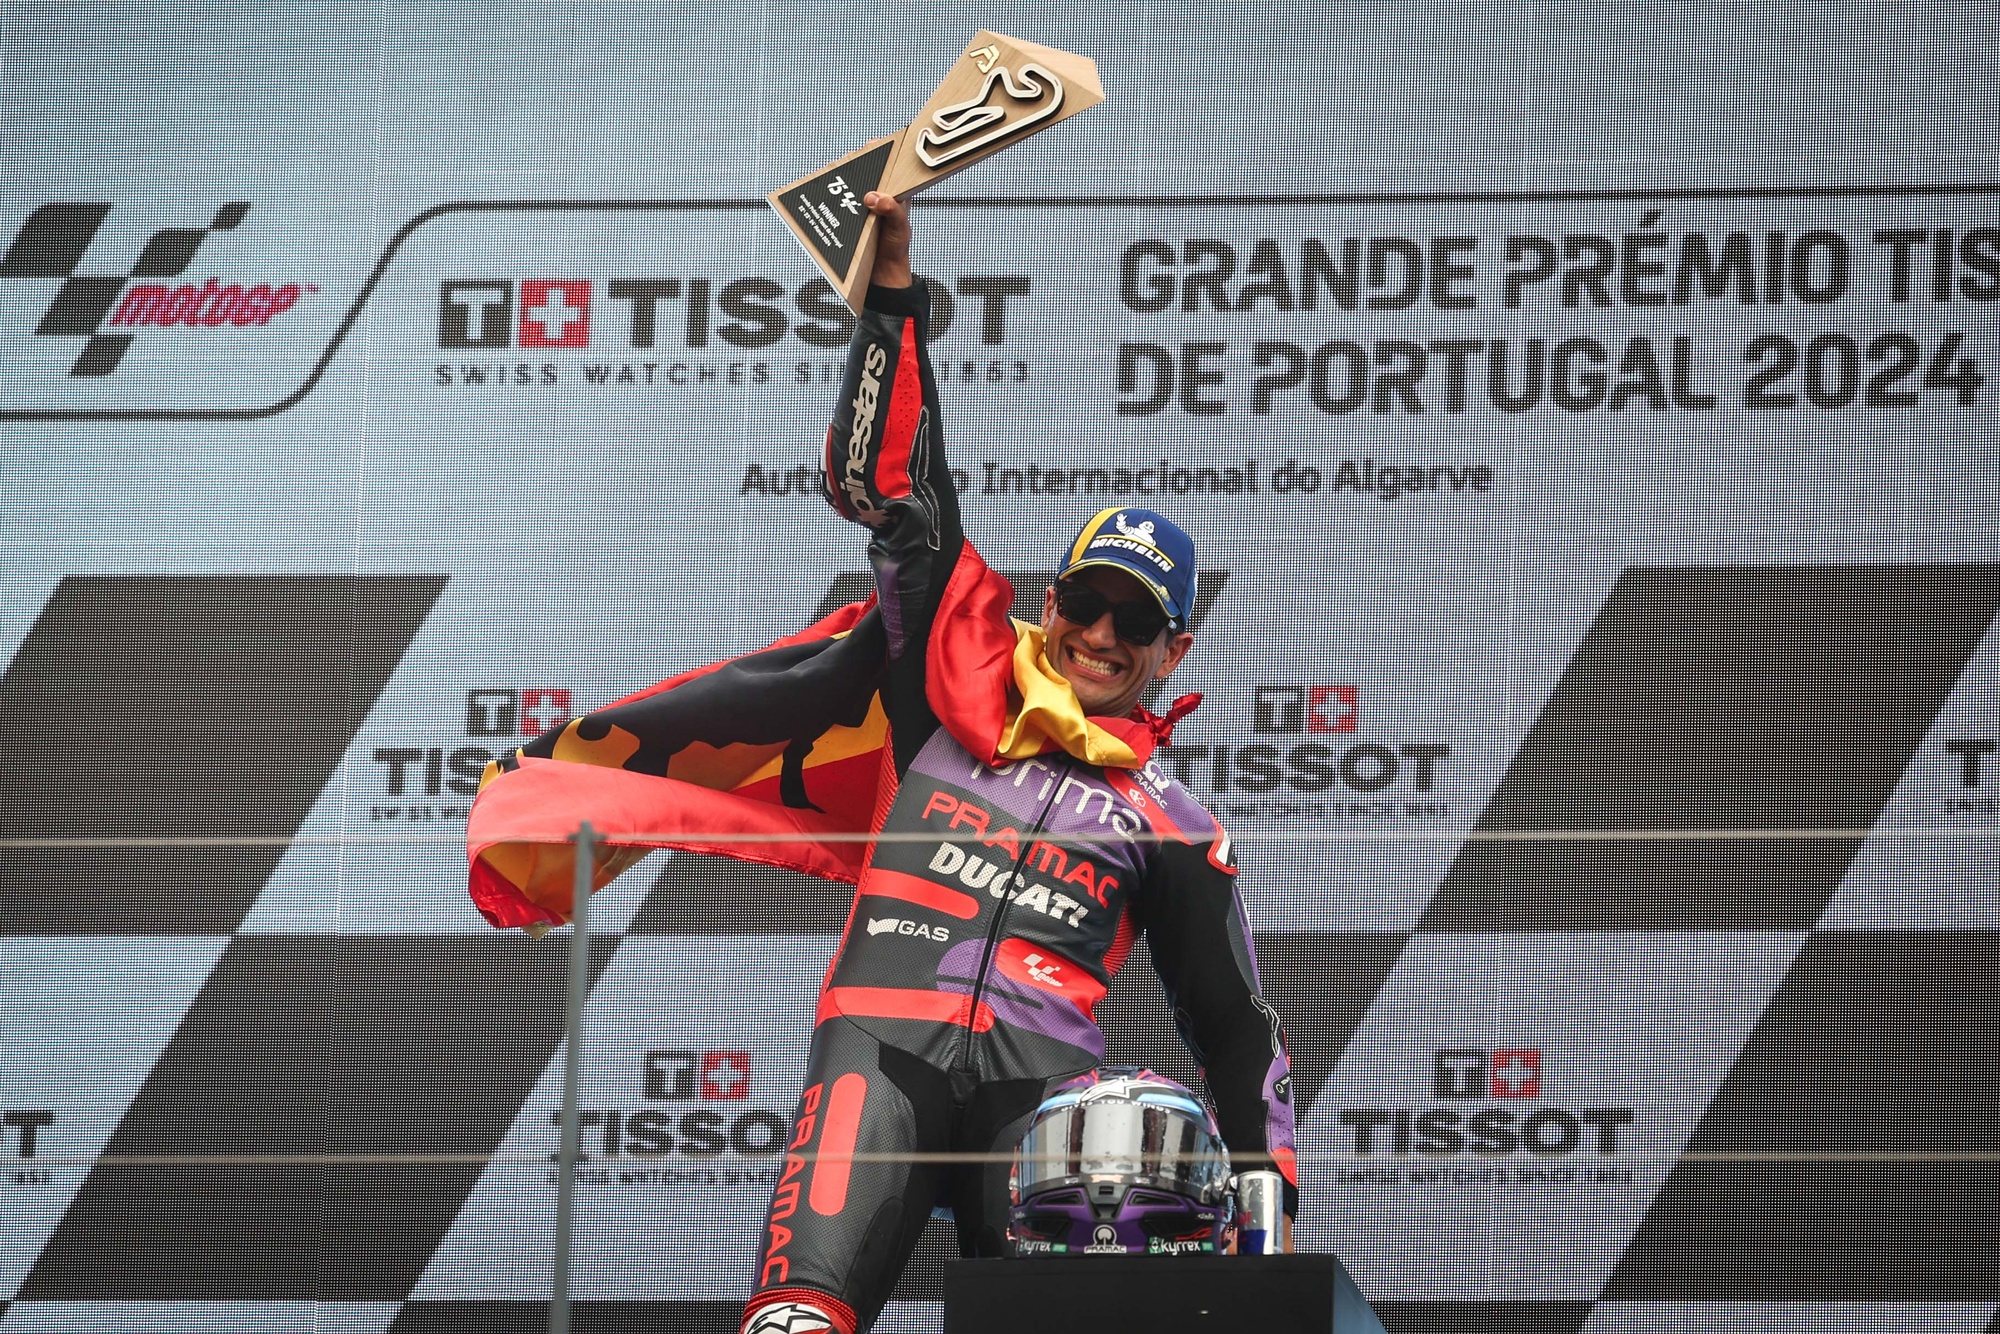 Jorge Martin of Spain and Prima Pramac Racing celebrates after winning the Moto GP Motorcycling Grand Prix of Portugal, in Portimao, Portugal, 24 March 2024. JOSE SENA GOULAO/LUSA